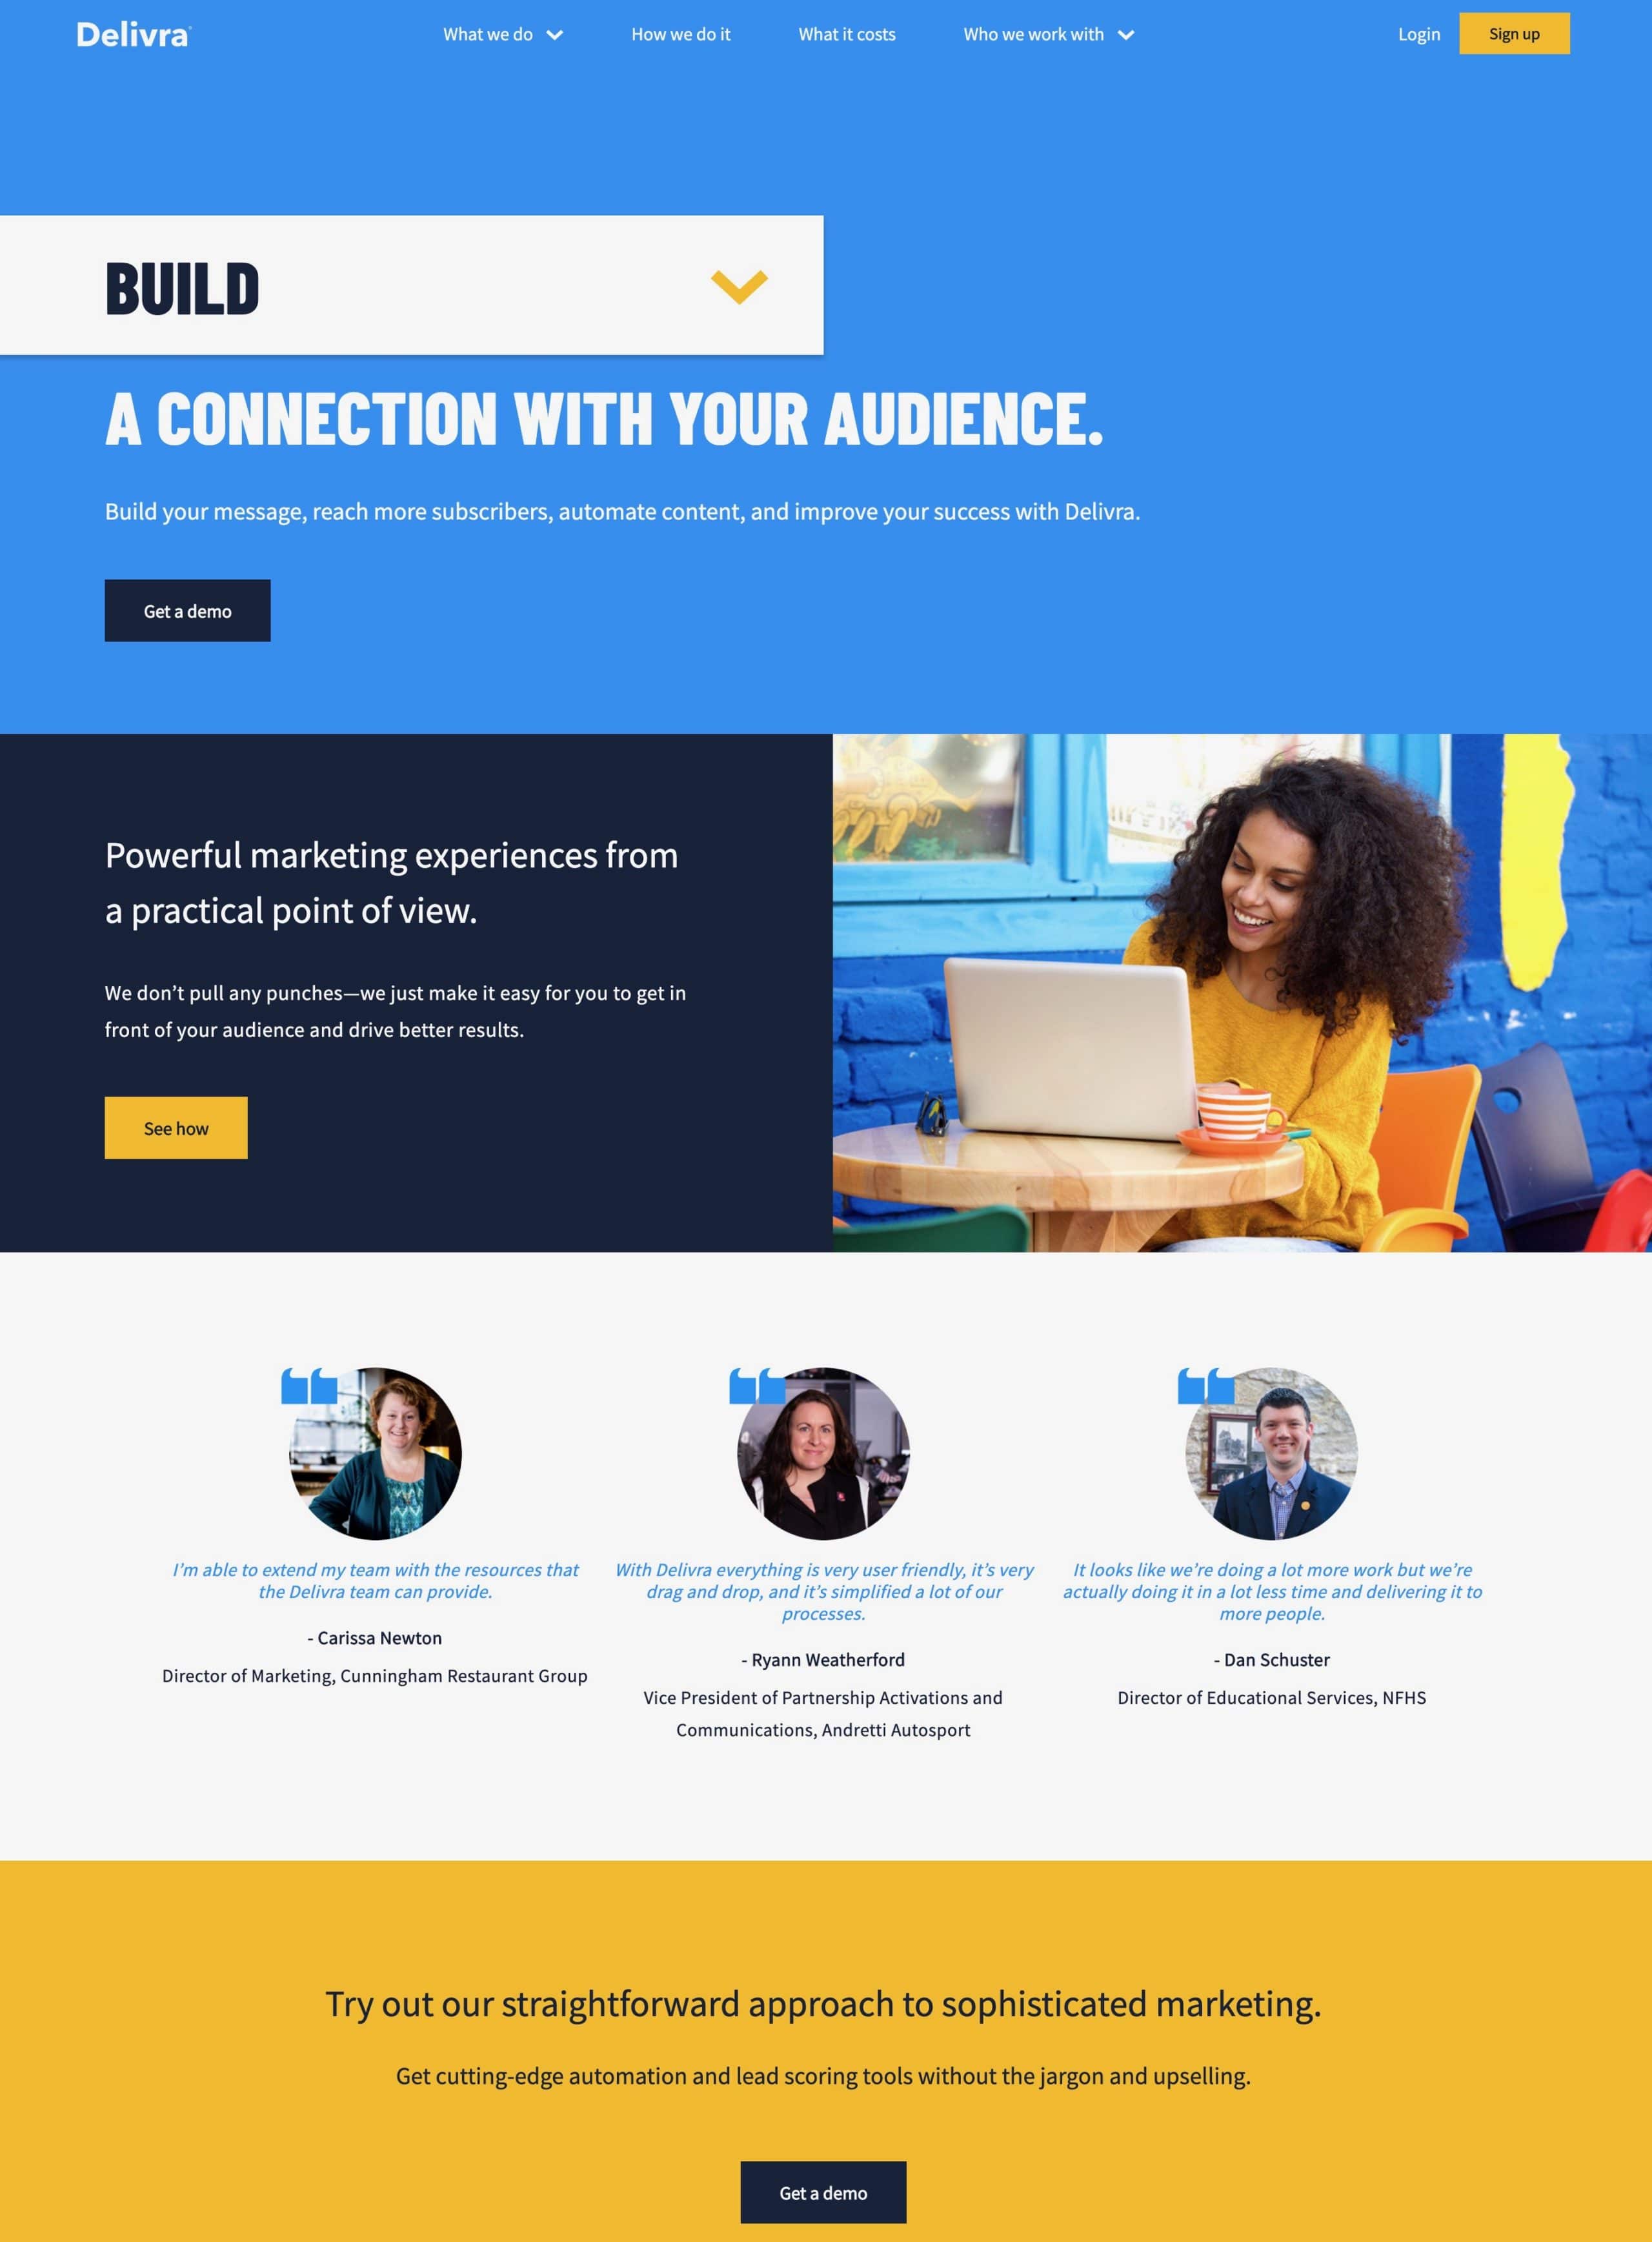 Delivra landing page example delivers a strong CTA using highly contrasting colors, concise copy, with one primary CTA shown three times on the landing page.